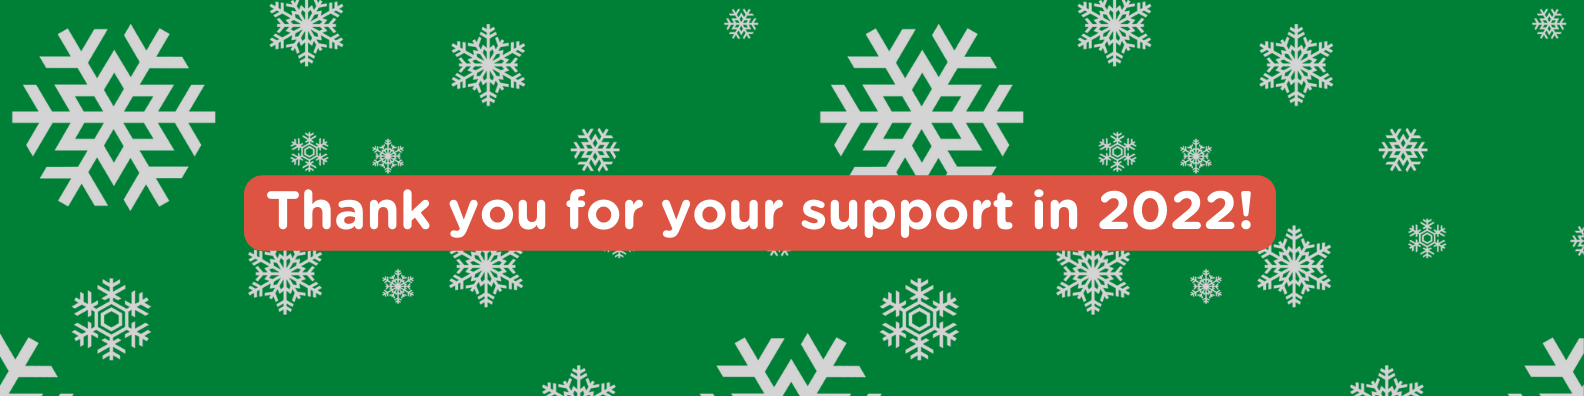 Snowflakes and a thank you message to our supporters